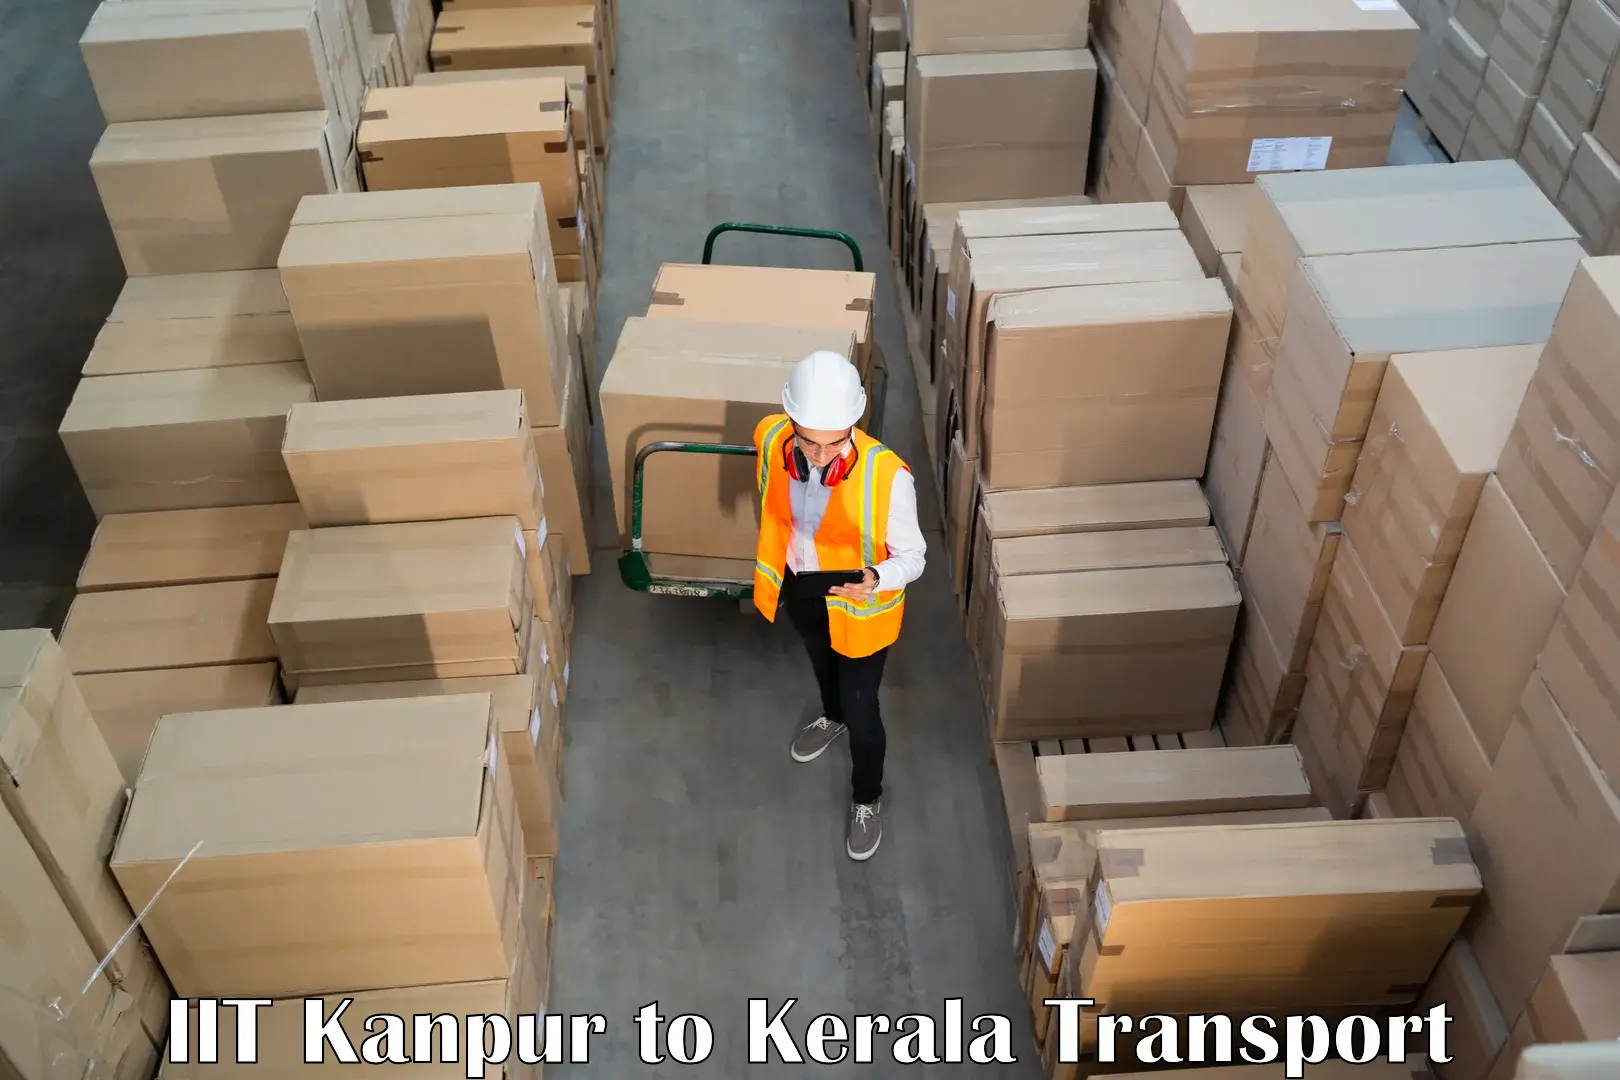 Daily parcel service transport IIT Kanpur to Taliparamba